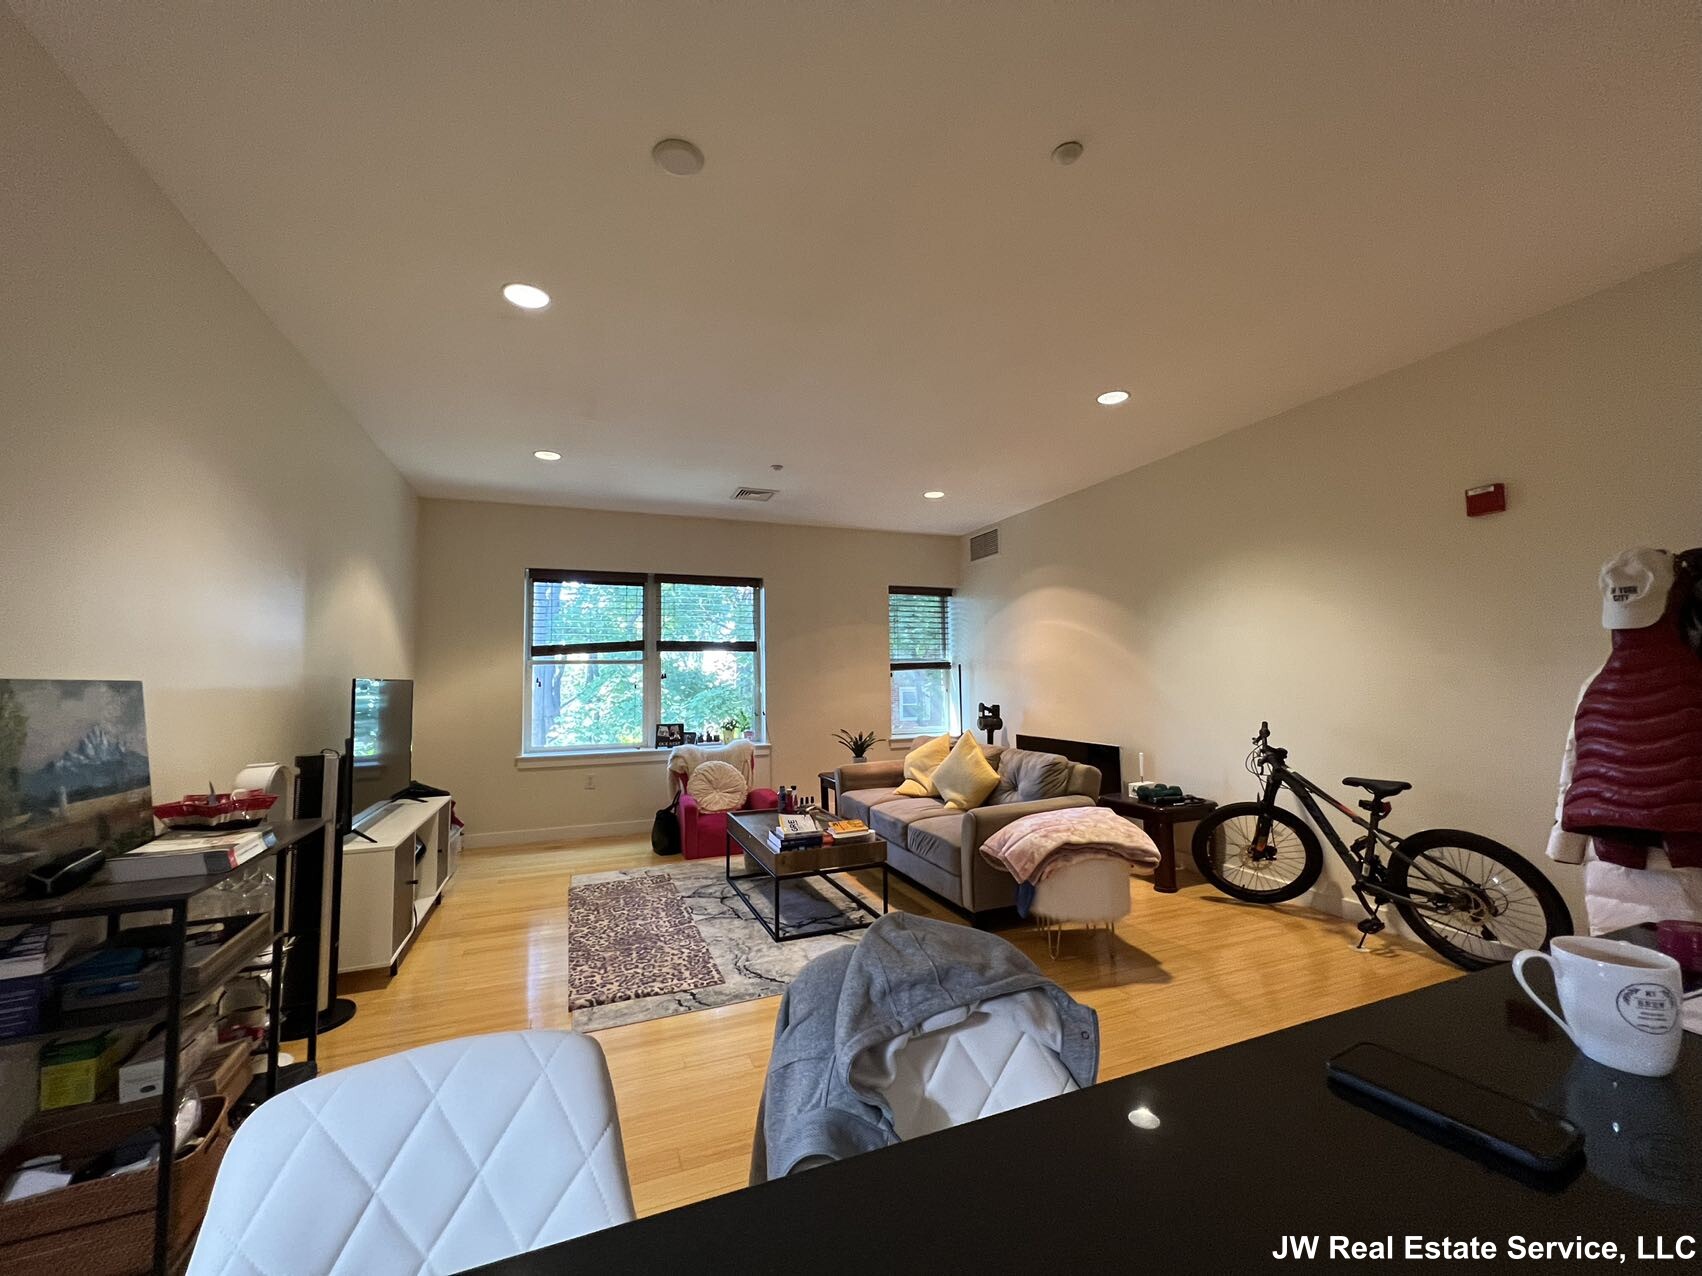 Photos of apartment on Chestnut Hill Ave.,Boston MA 02135